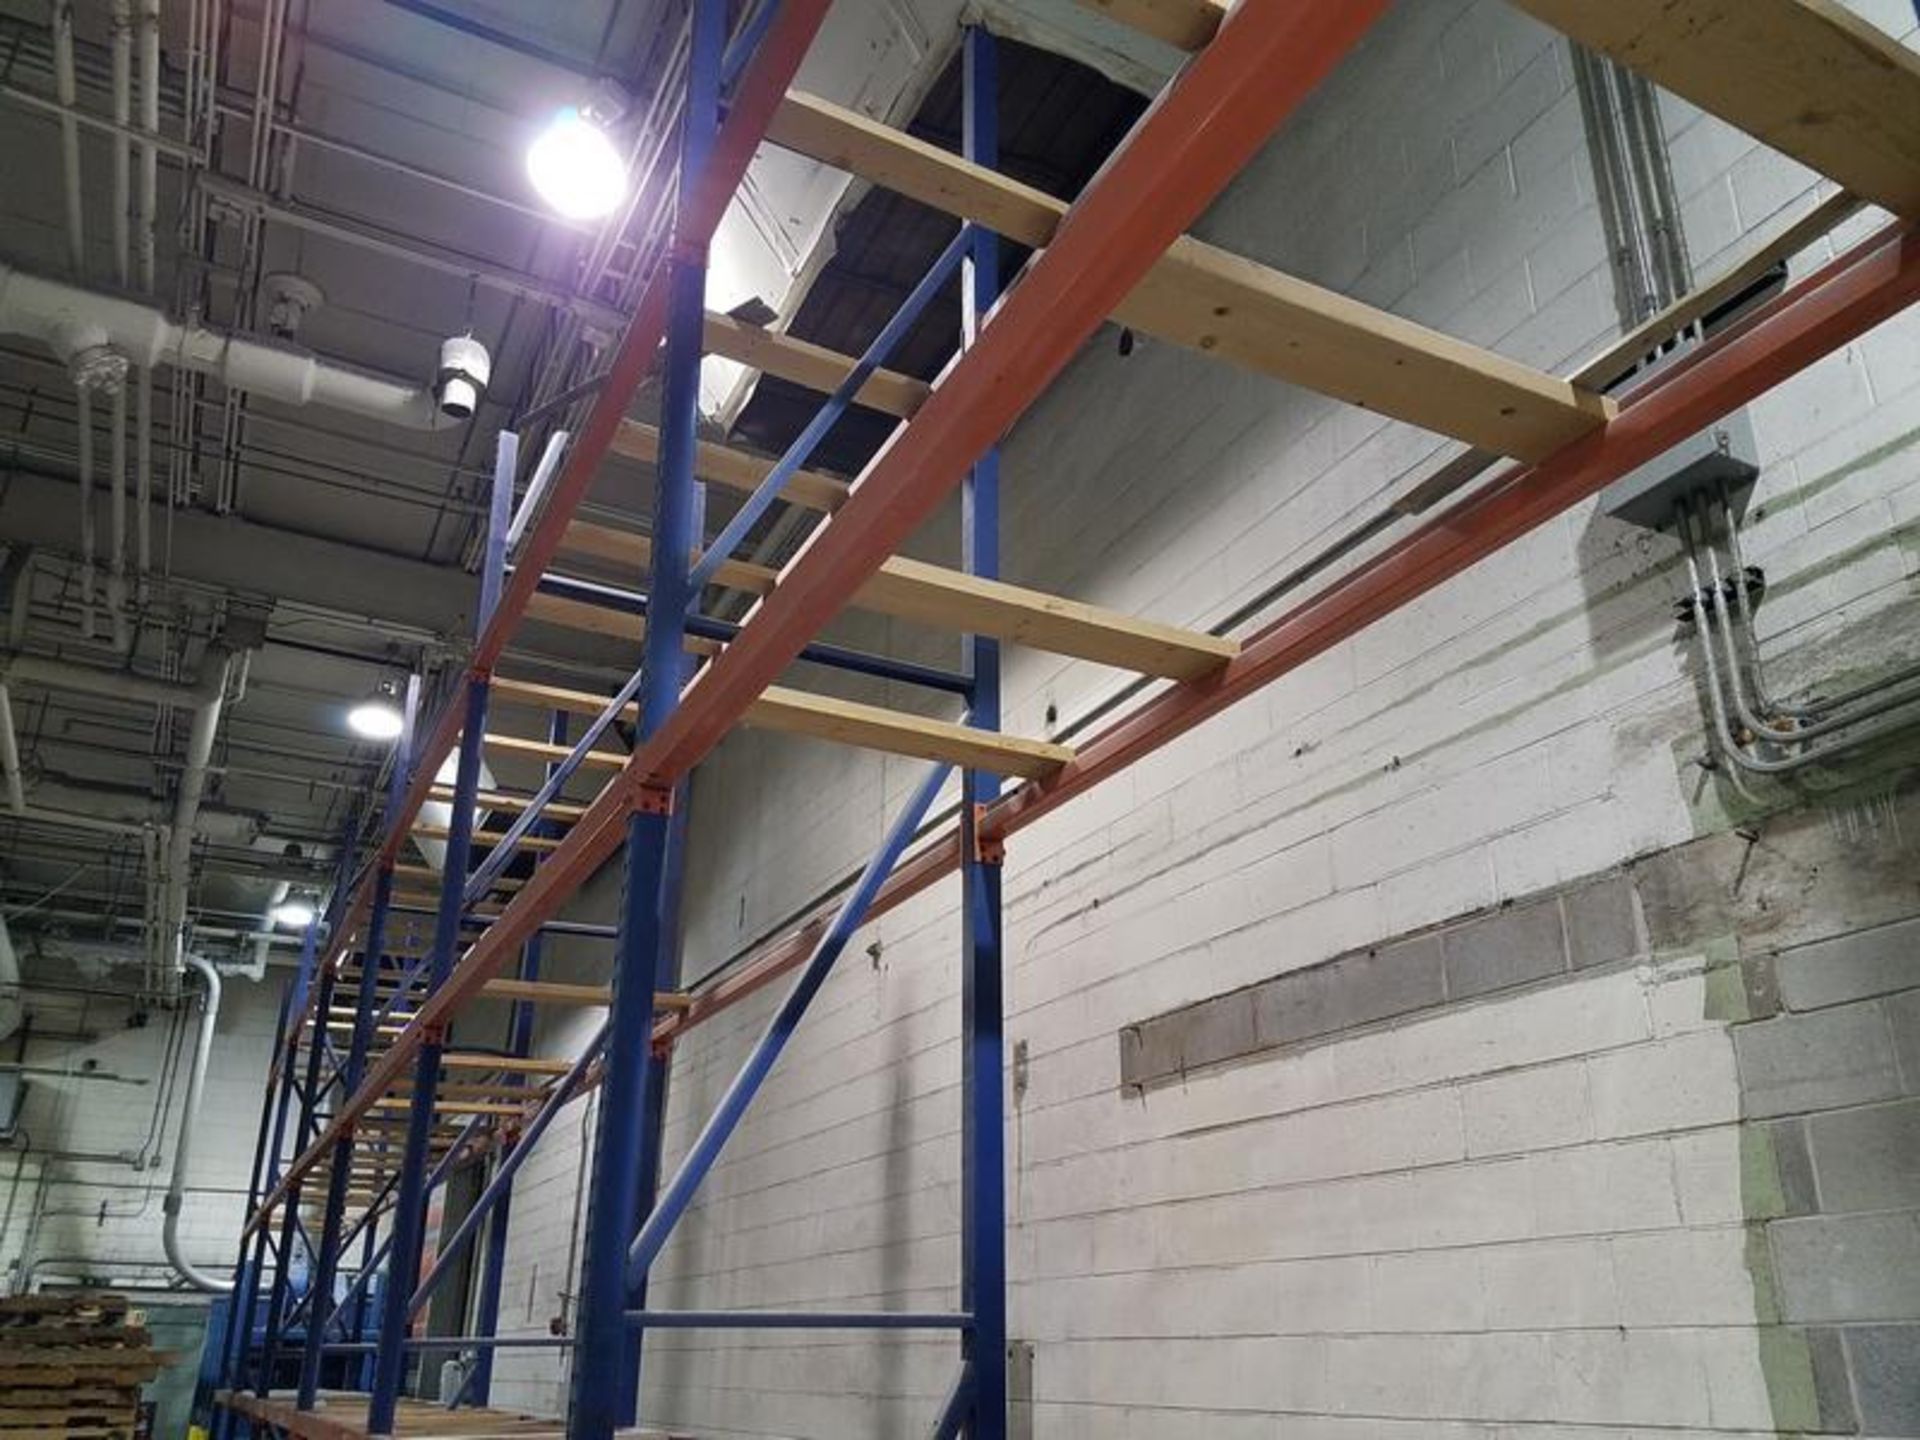 LOT (6) Sections of Adjustable Pallet Racking, 9' x 36" x 18'H, Contents Not Included - Image 3 of 3